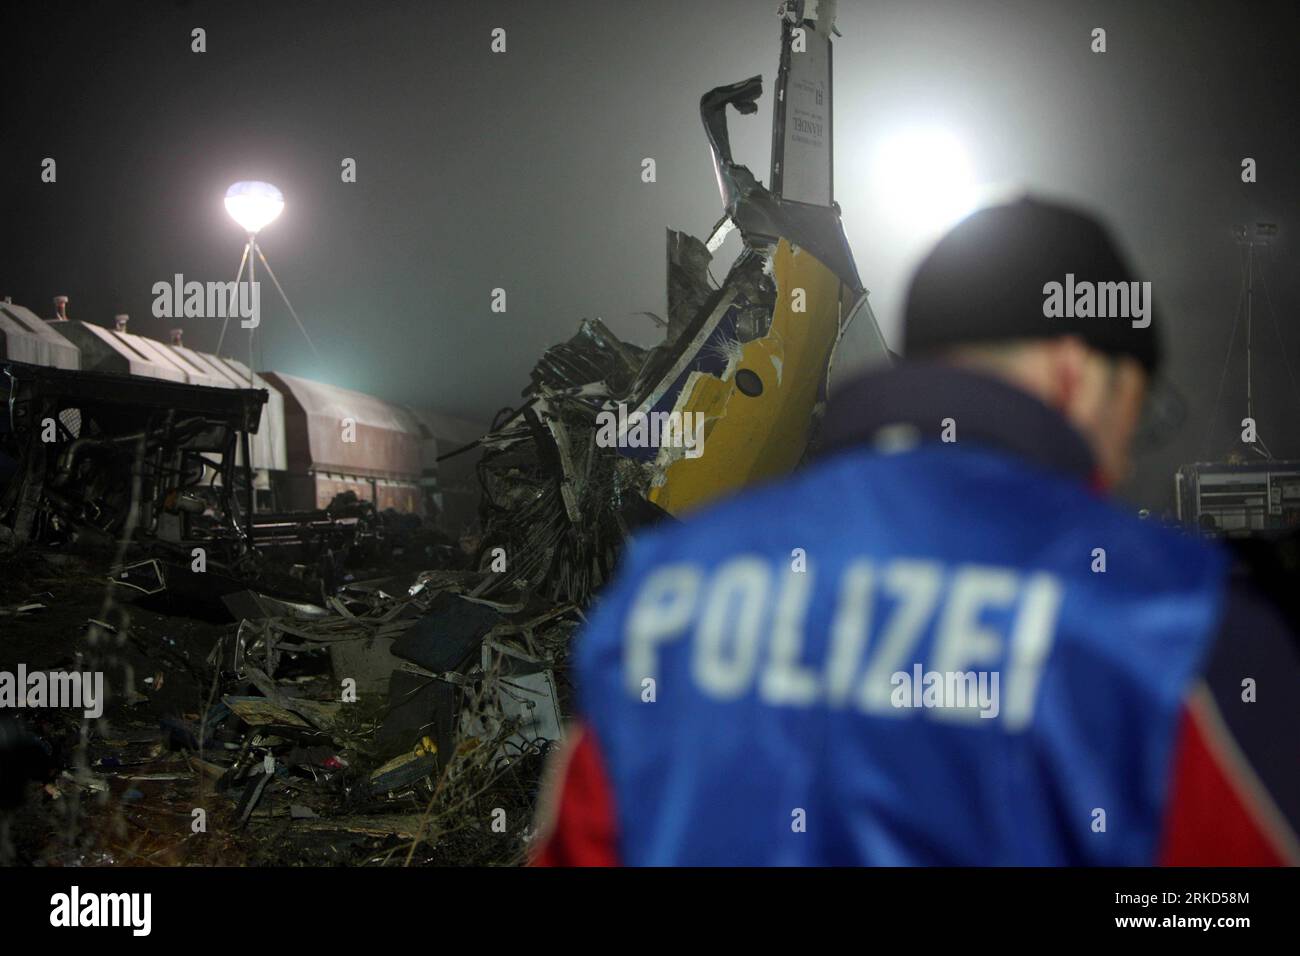 GER, Hordorf, Oschersleben - Jan. 30, 2011 Xinhua -- A policeman guards at the scene of a train collision accident in the Germany s eastern state Saxony-Anhalt on Jan. 30, 2011. A passenger and a freight train collided with each other here late Saturday, leaving at least 10 people dead and about 20 seriously injured, police said. Xinhua/Luo Huanhuan zf GERMANY-SAXONY-ANHALT-TRAIN COLLISION PUBLICATIONxNOTxINxCHN Stock Photo